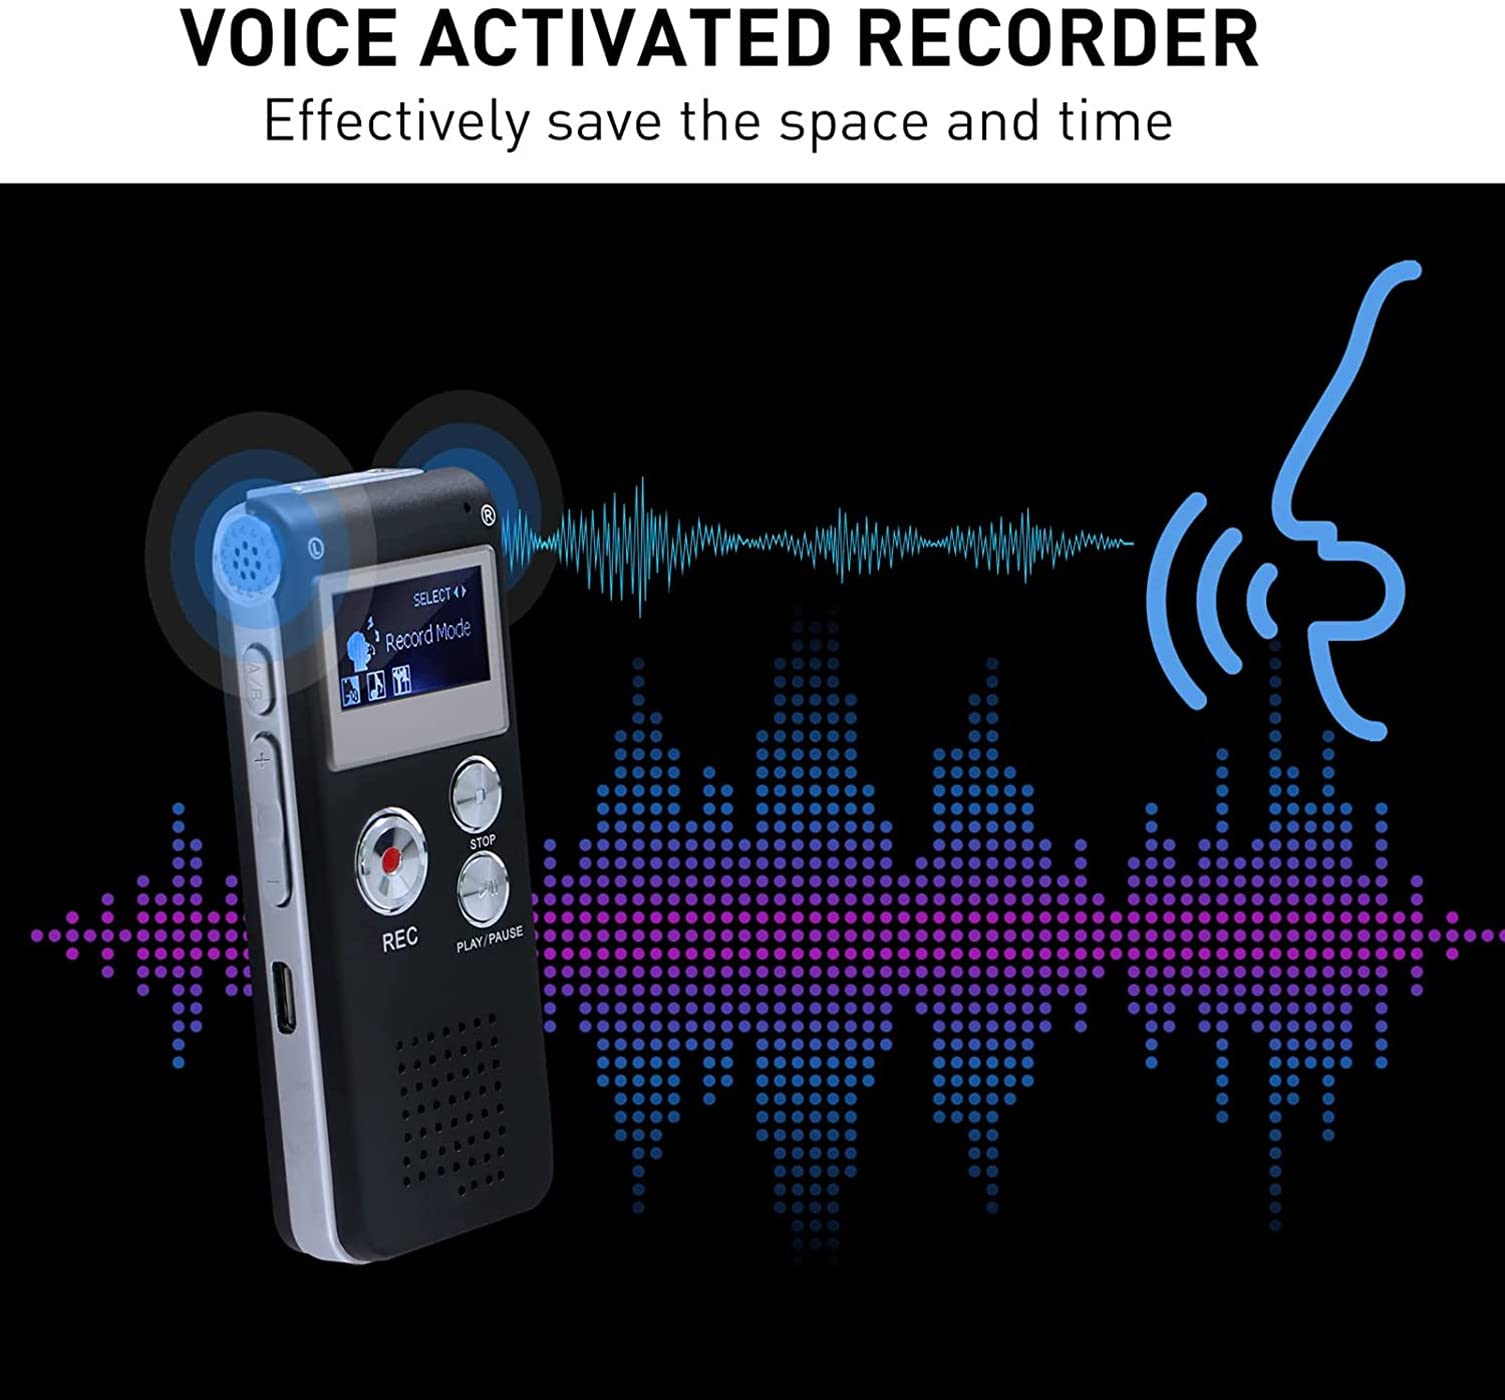 HXTWORLD Digital Voice Recorders 16GB Audio Recorder Voice Activated Recorder for Lectures, Meetings, Interviews Recording Device Tape Recorder with Microphone USB Cable, MP3 Player